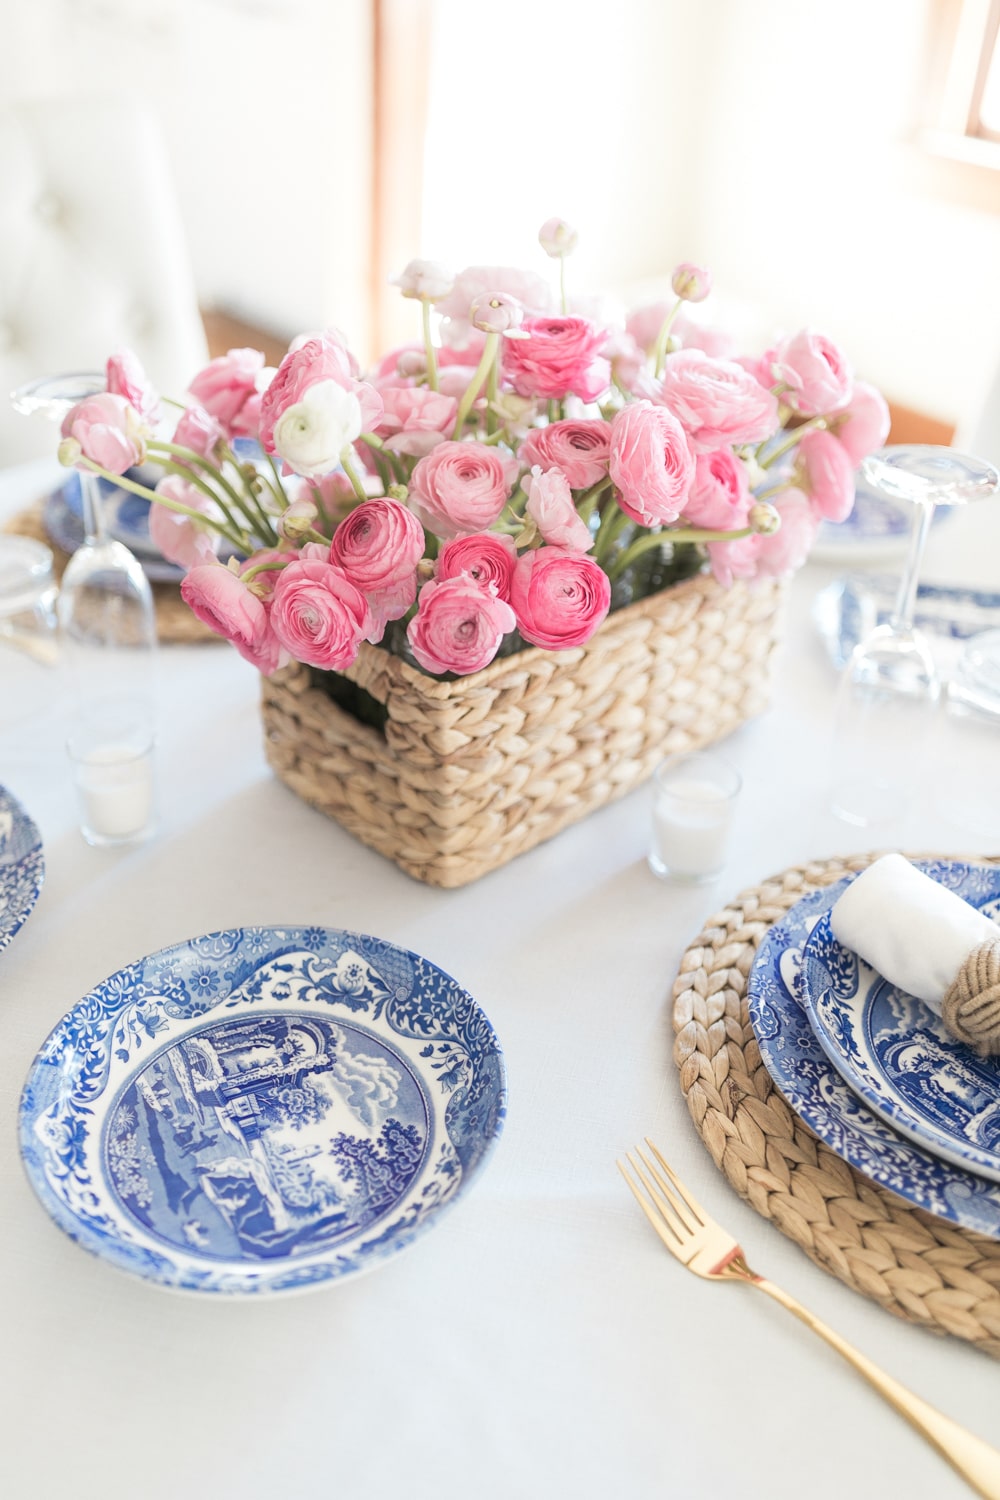 Romantic table setting for two designed by blogger Stephanie Ziajka on Diary of a Debutante